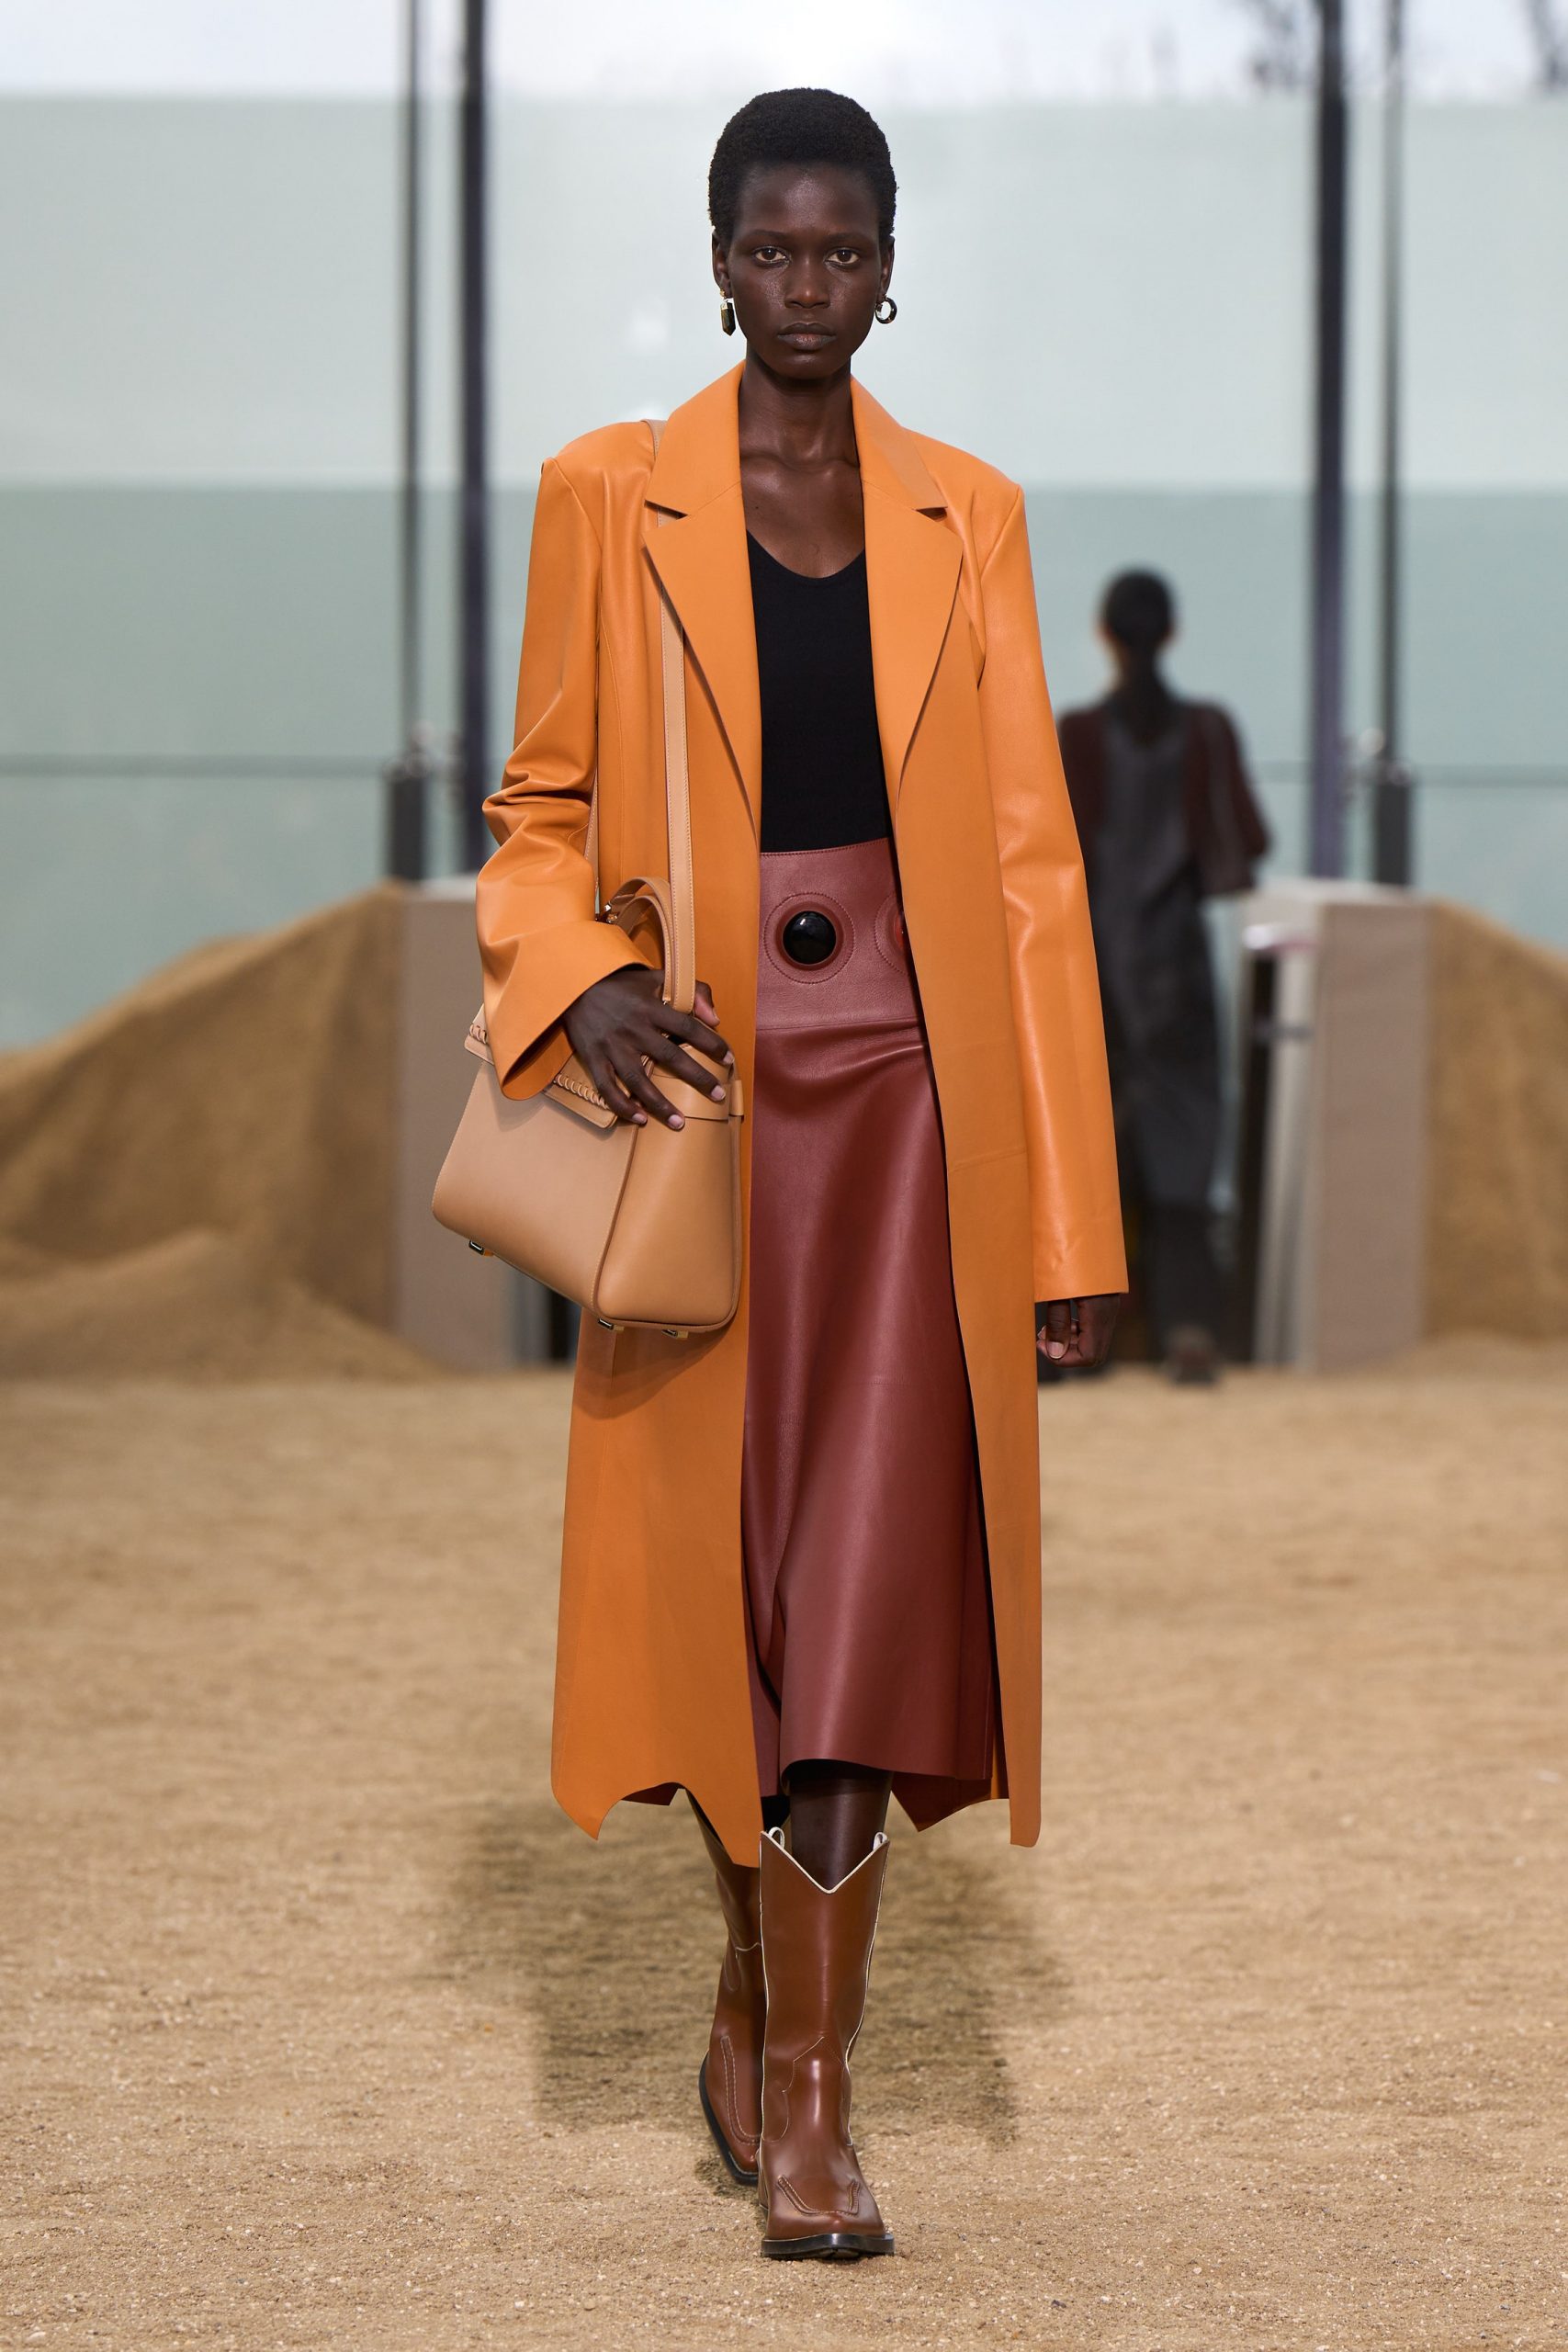 A model wears a black top, leather knee-length skirt, cowboy boots, and a leather coat